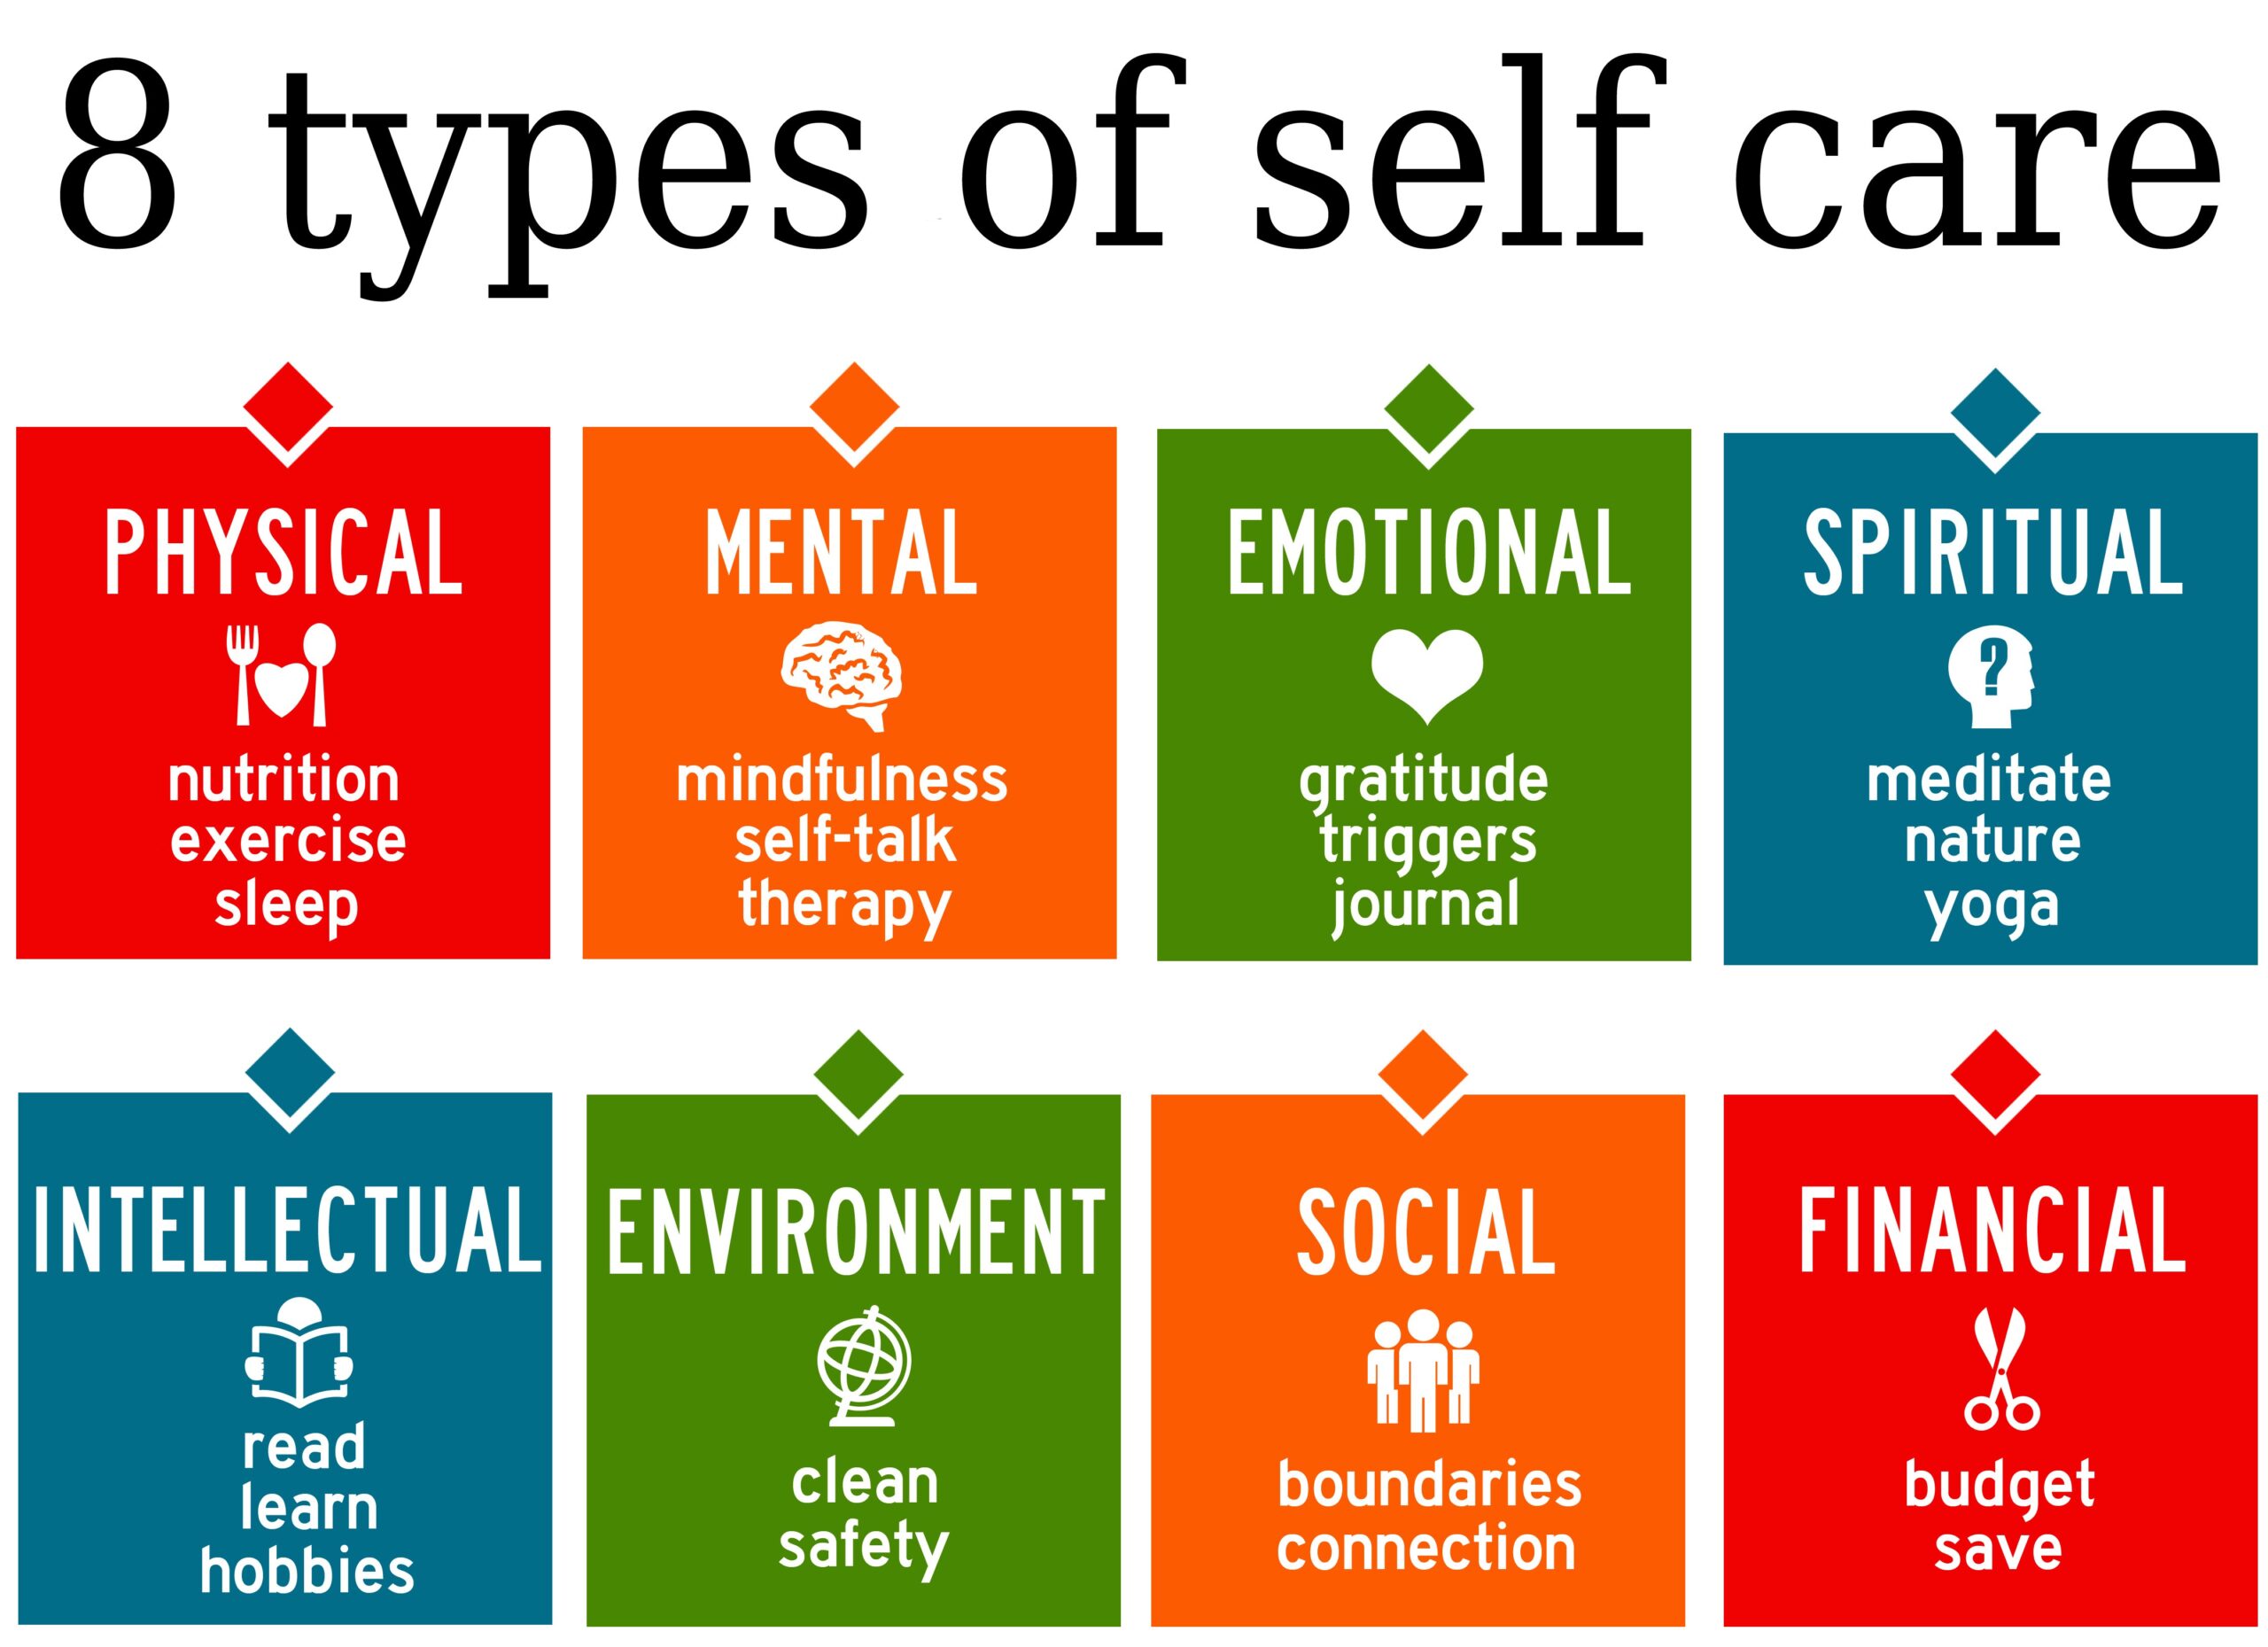 Embracing Holistic Self-Care: 8 Types of Self-Care for Lasting